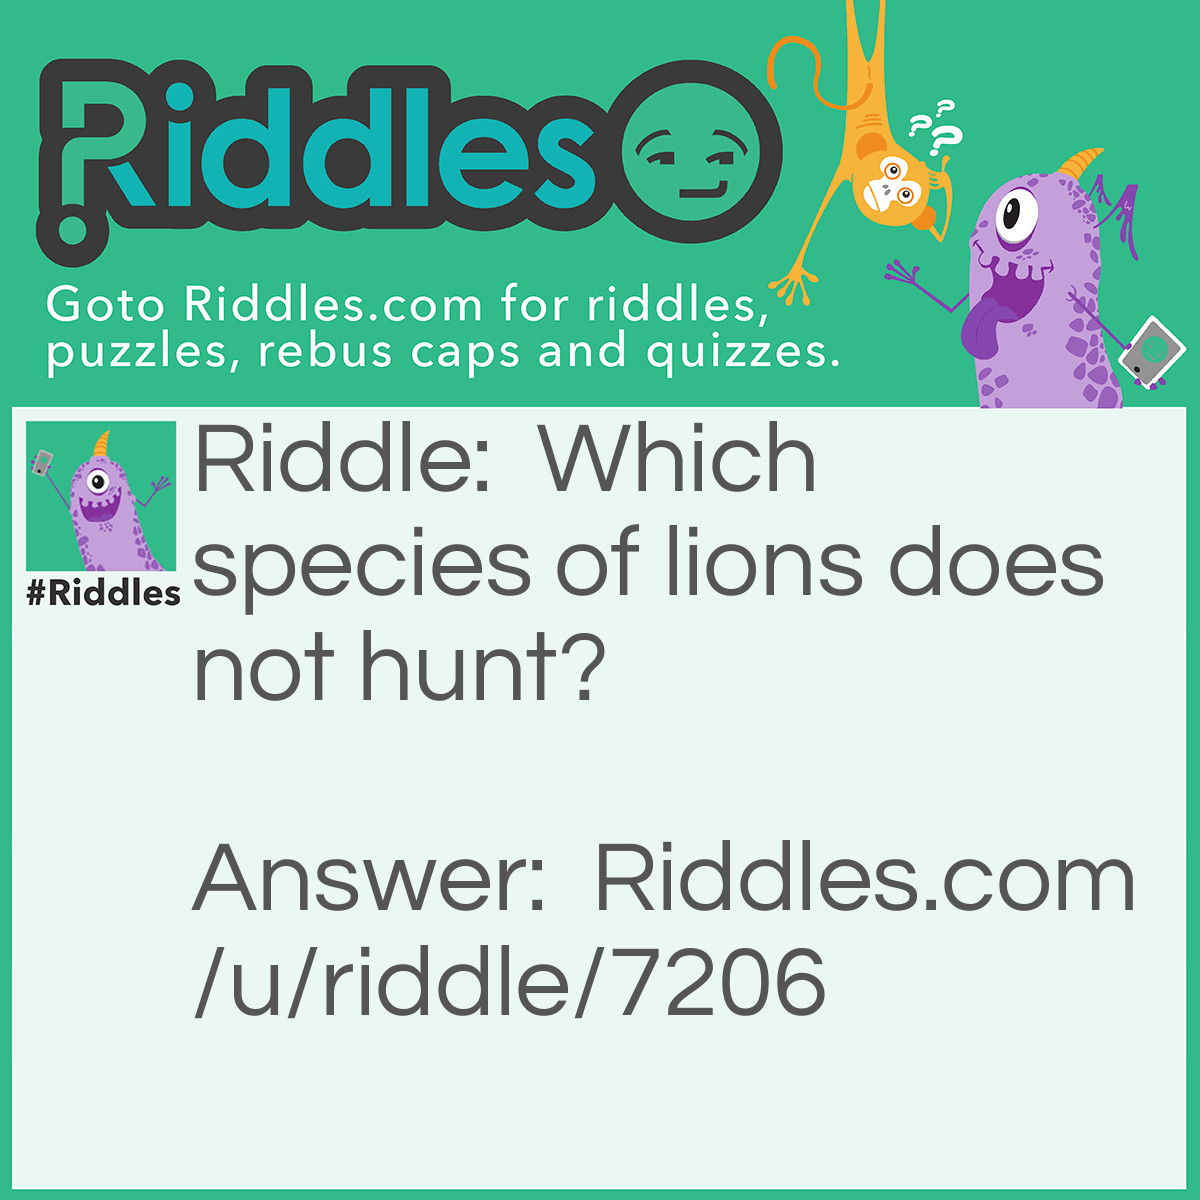 Riddle: Which species of lions does not hunt? Answer: Dandelion.